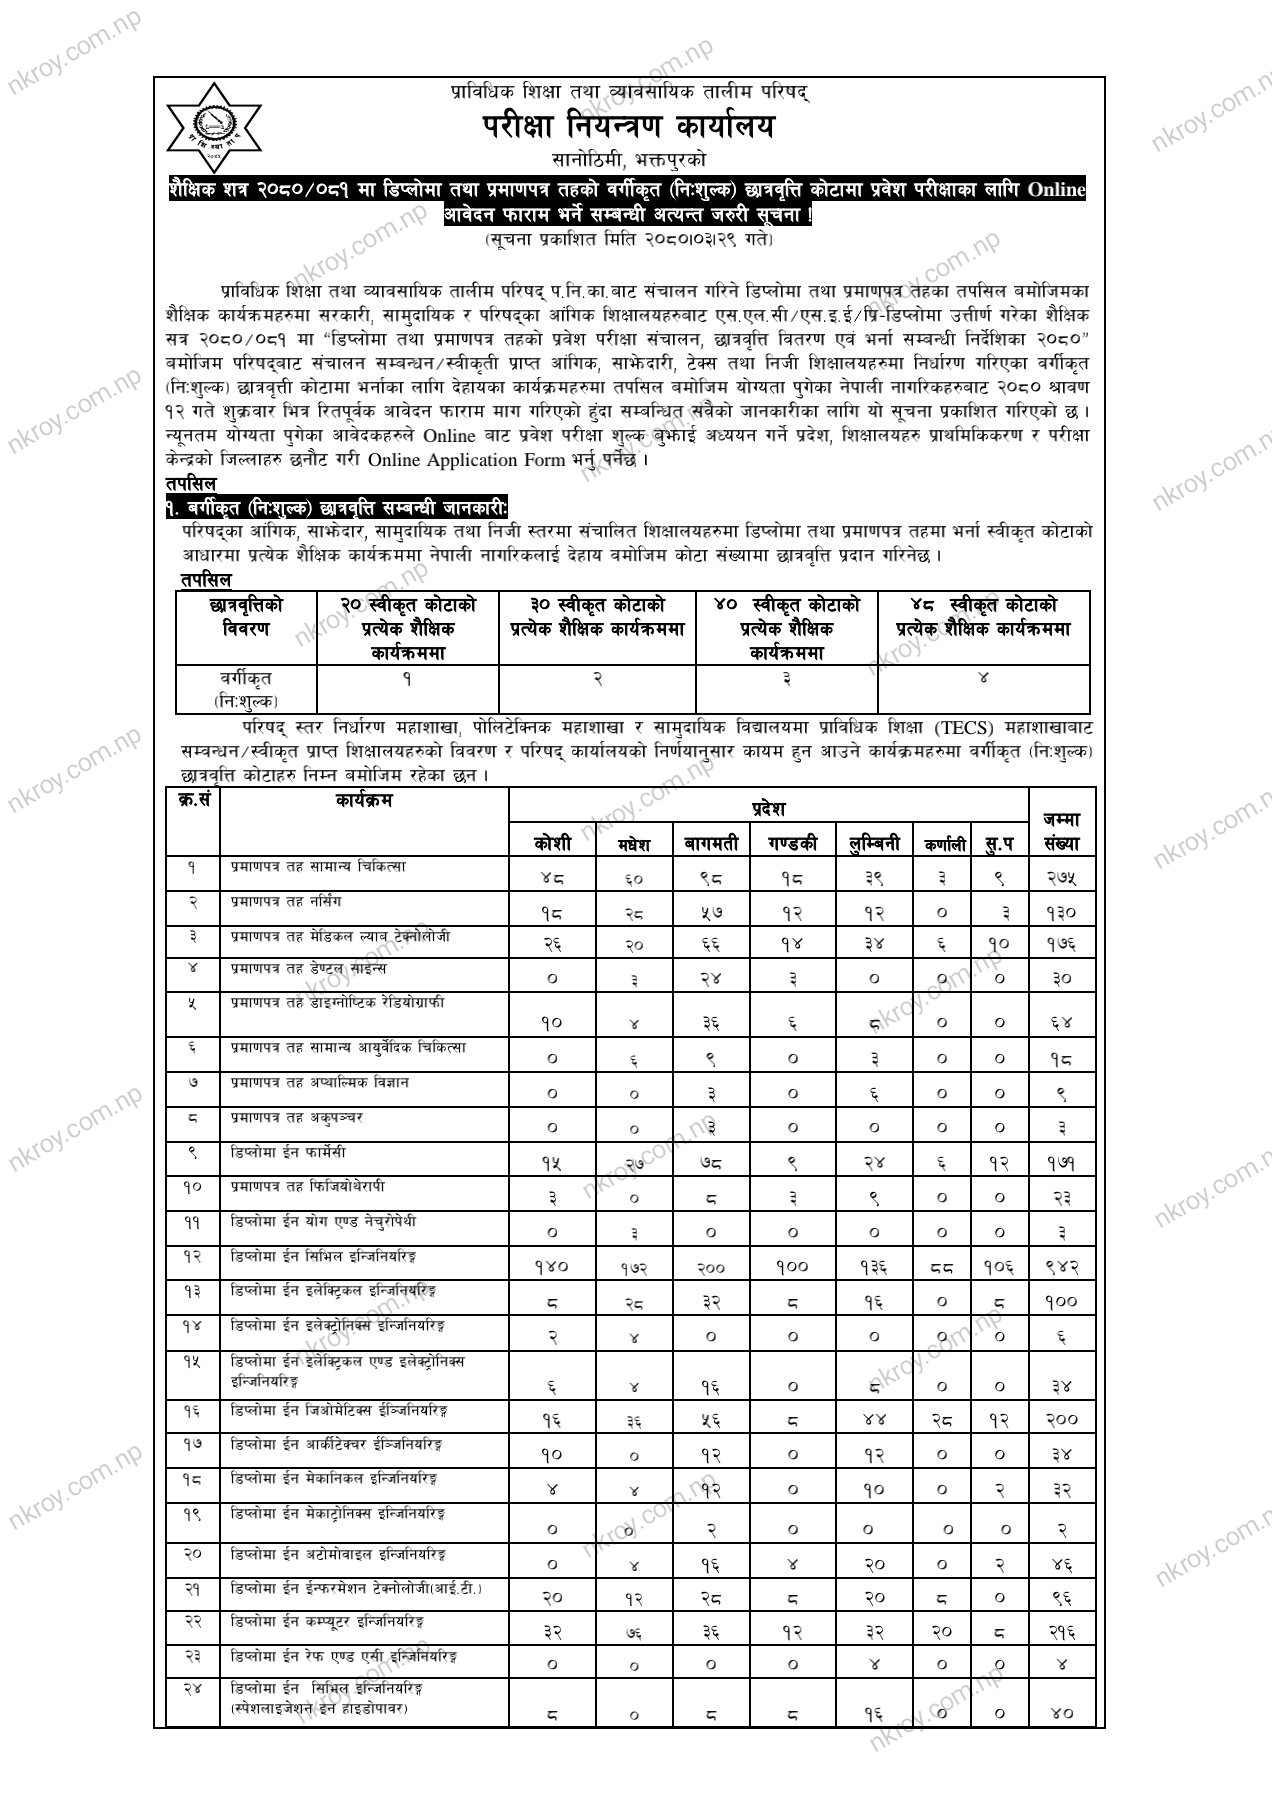 CTEVT Diploma/PCL Level Classified Scholarship Entrance Exam Notice 2080